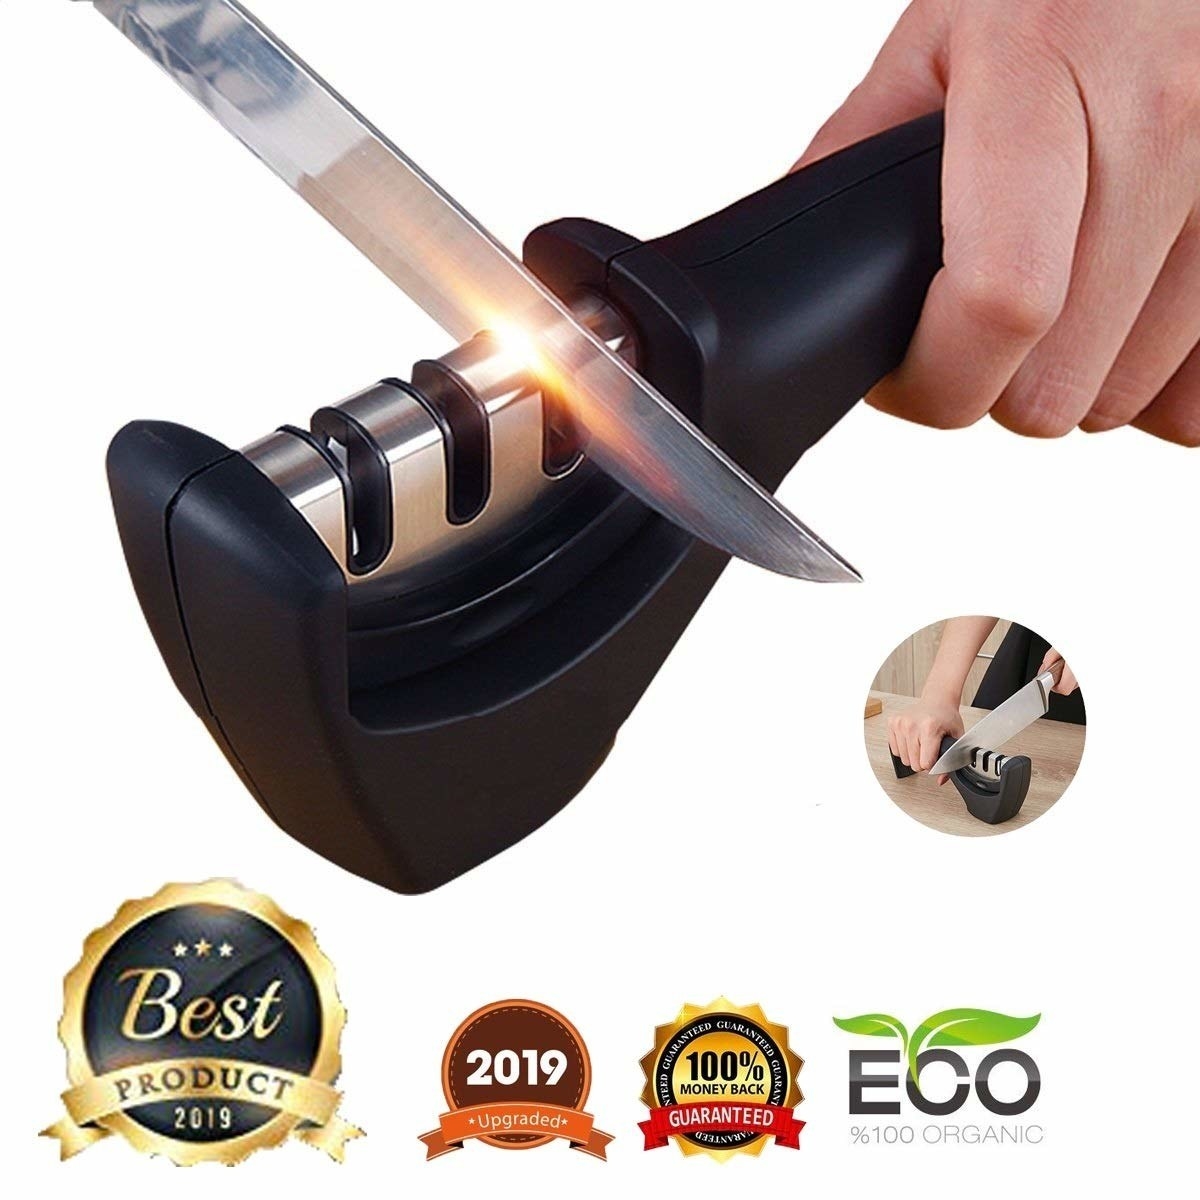 A knife being sharpened while a person&#x27;s hand holds the sharpener down.